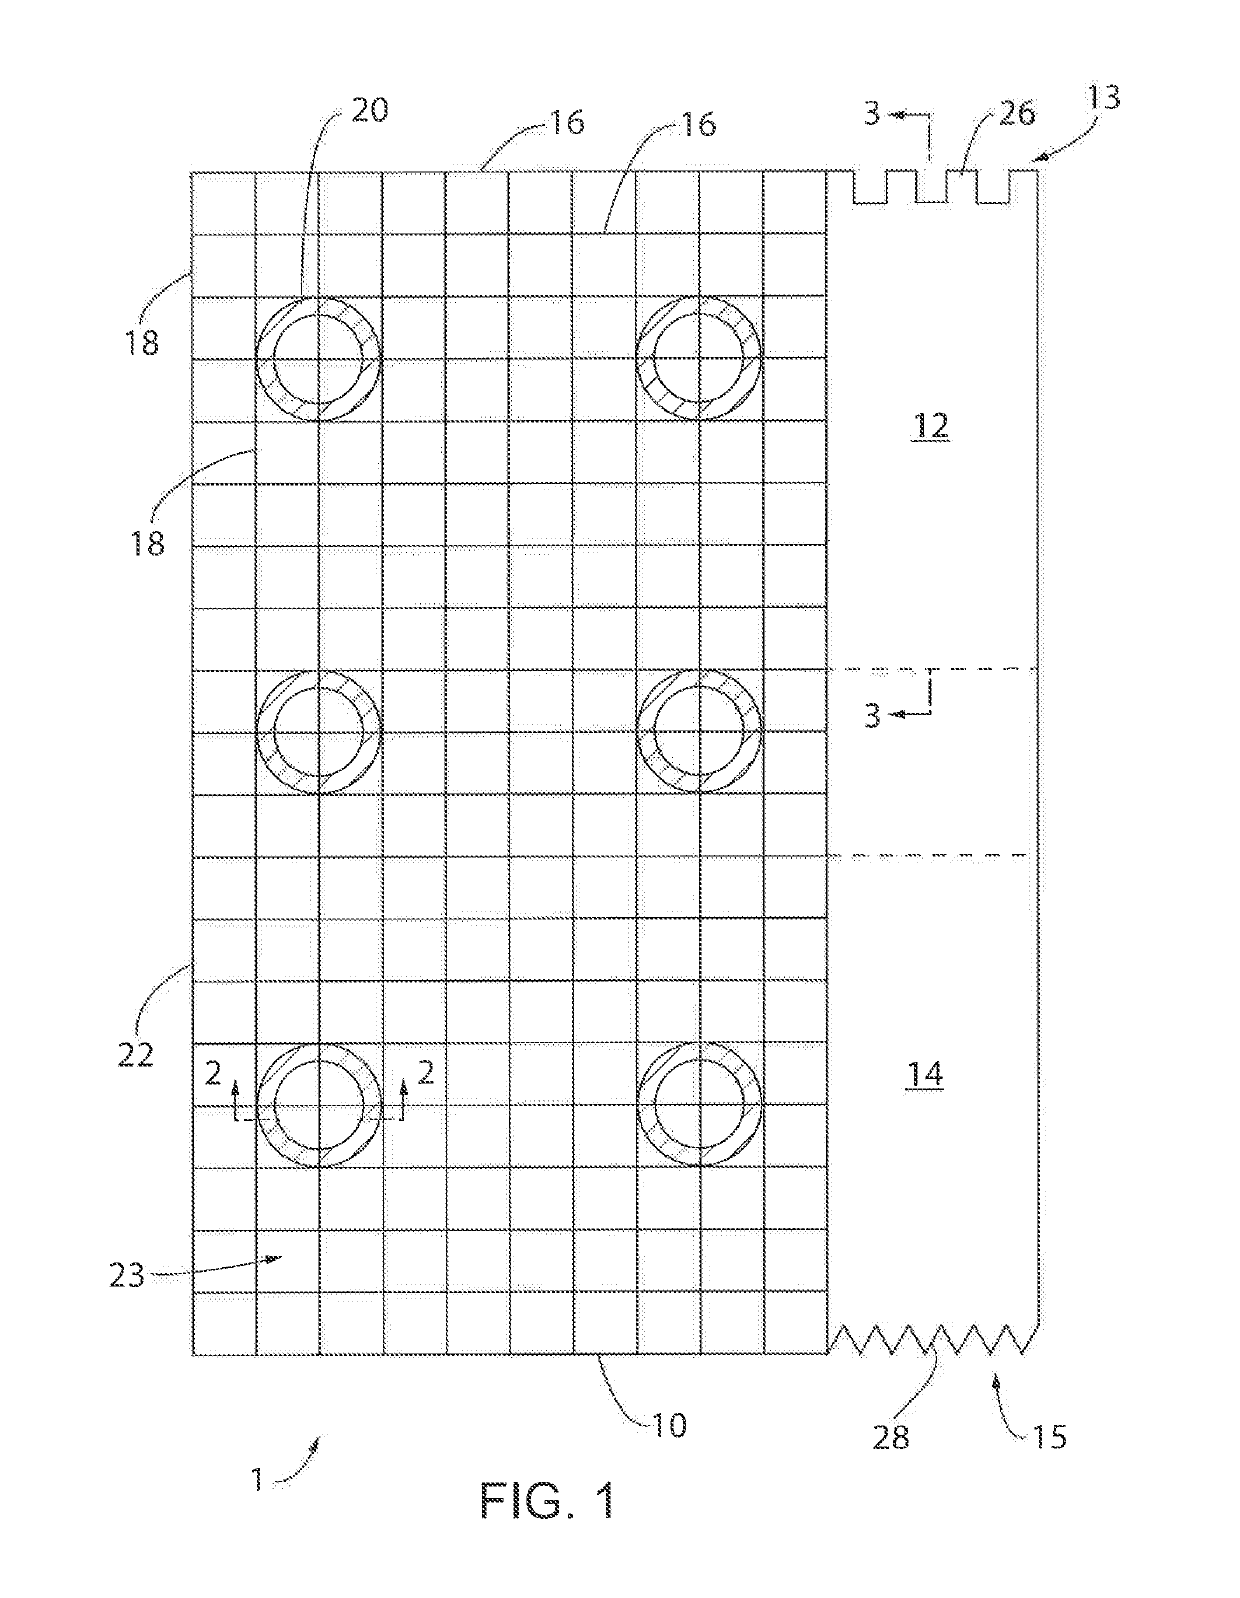 Grid Plate for Laying Tile on Uneven Surfaces